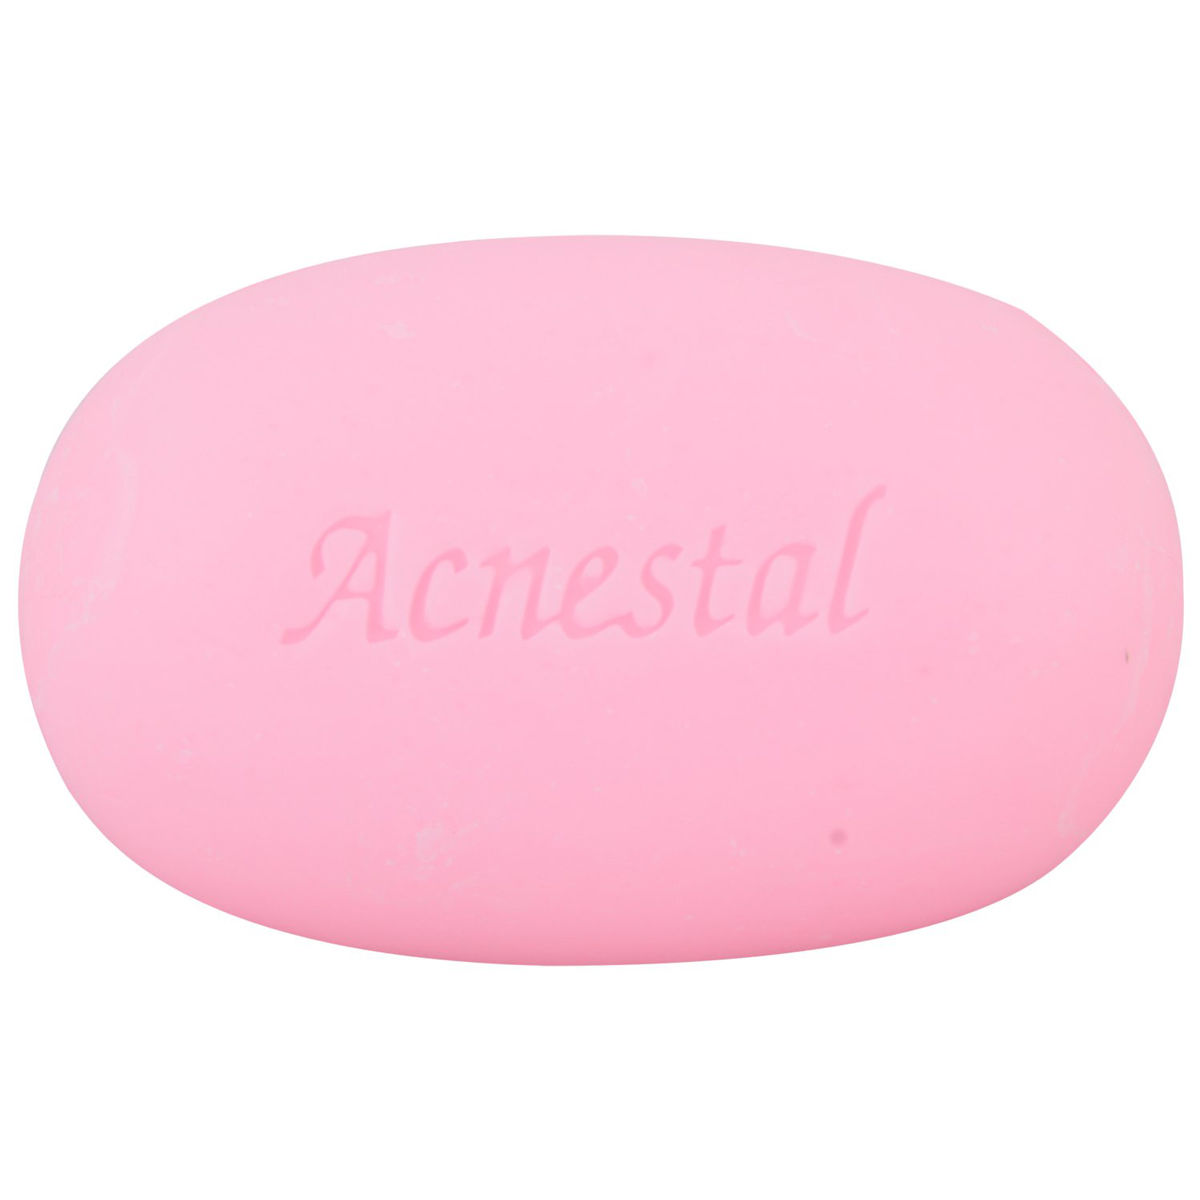 Acnestal Soap, 75 gm Price, Uses, Side Effects, Composition - Apollo ...